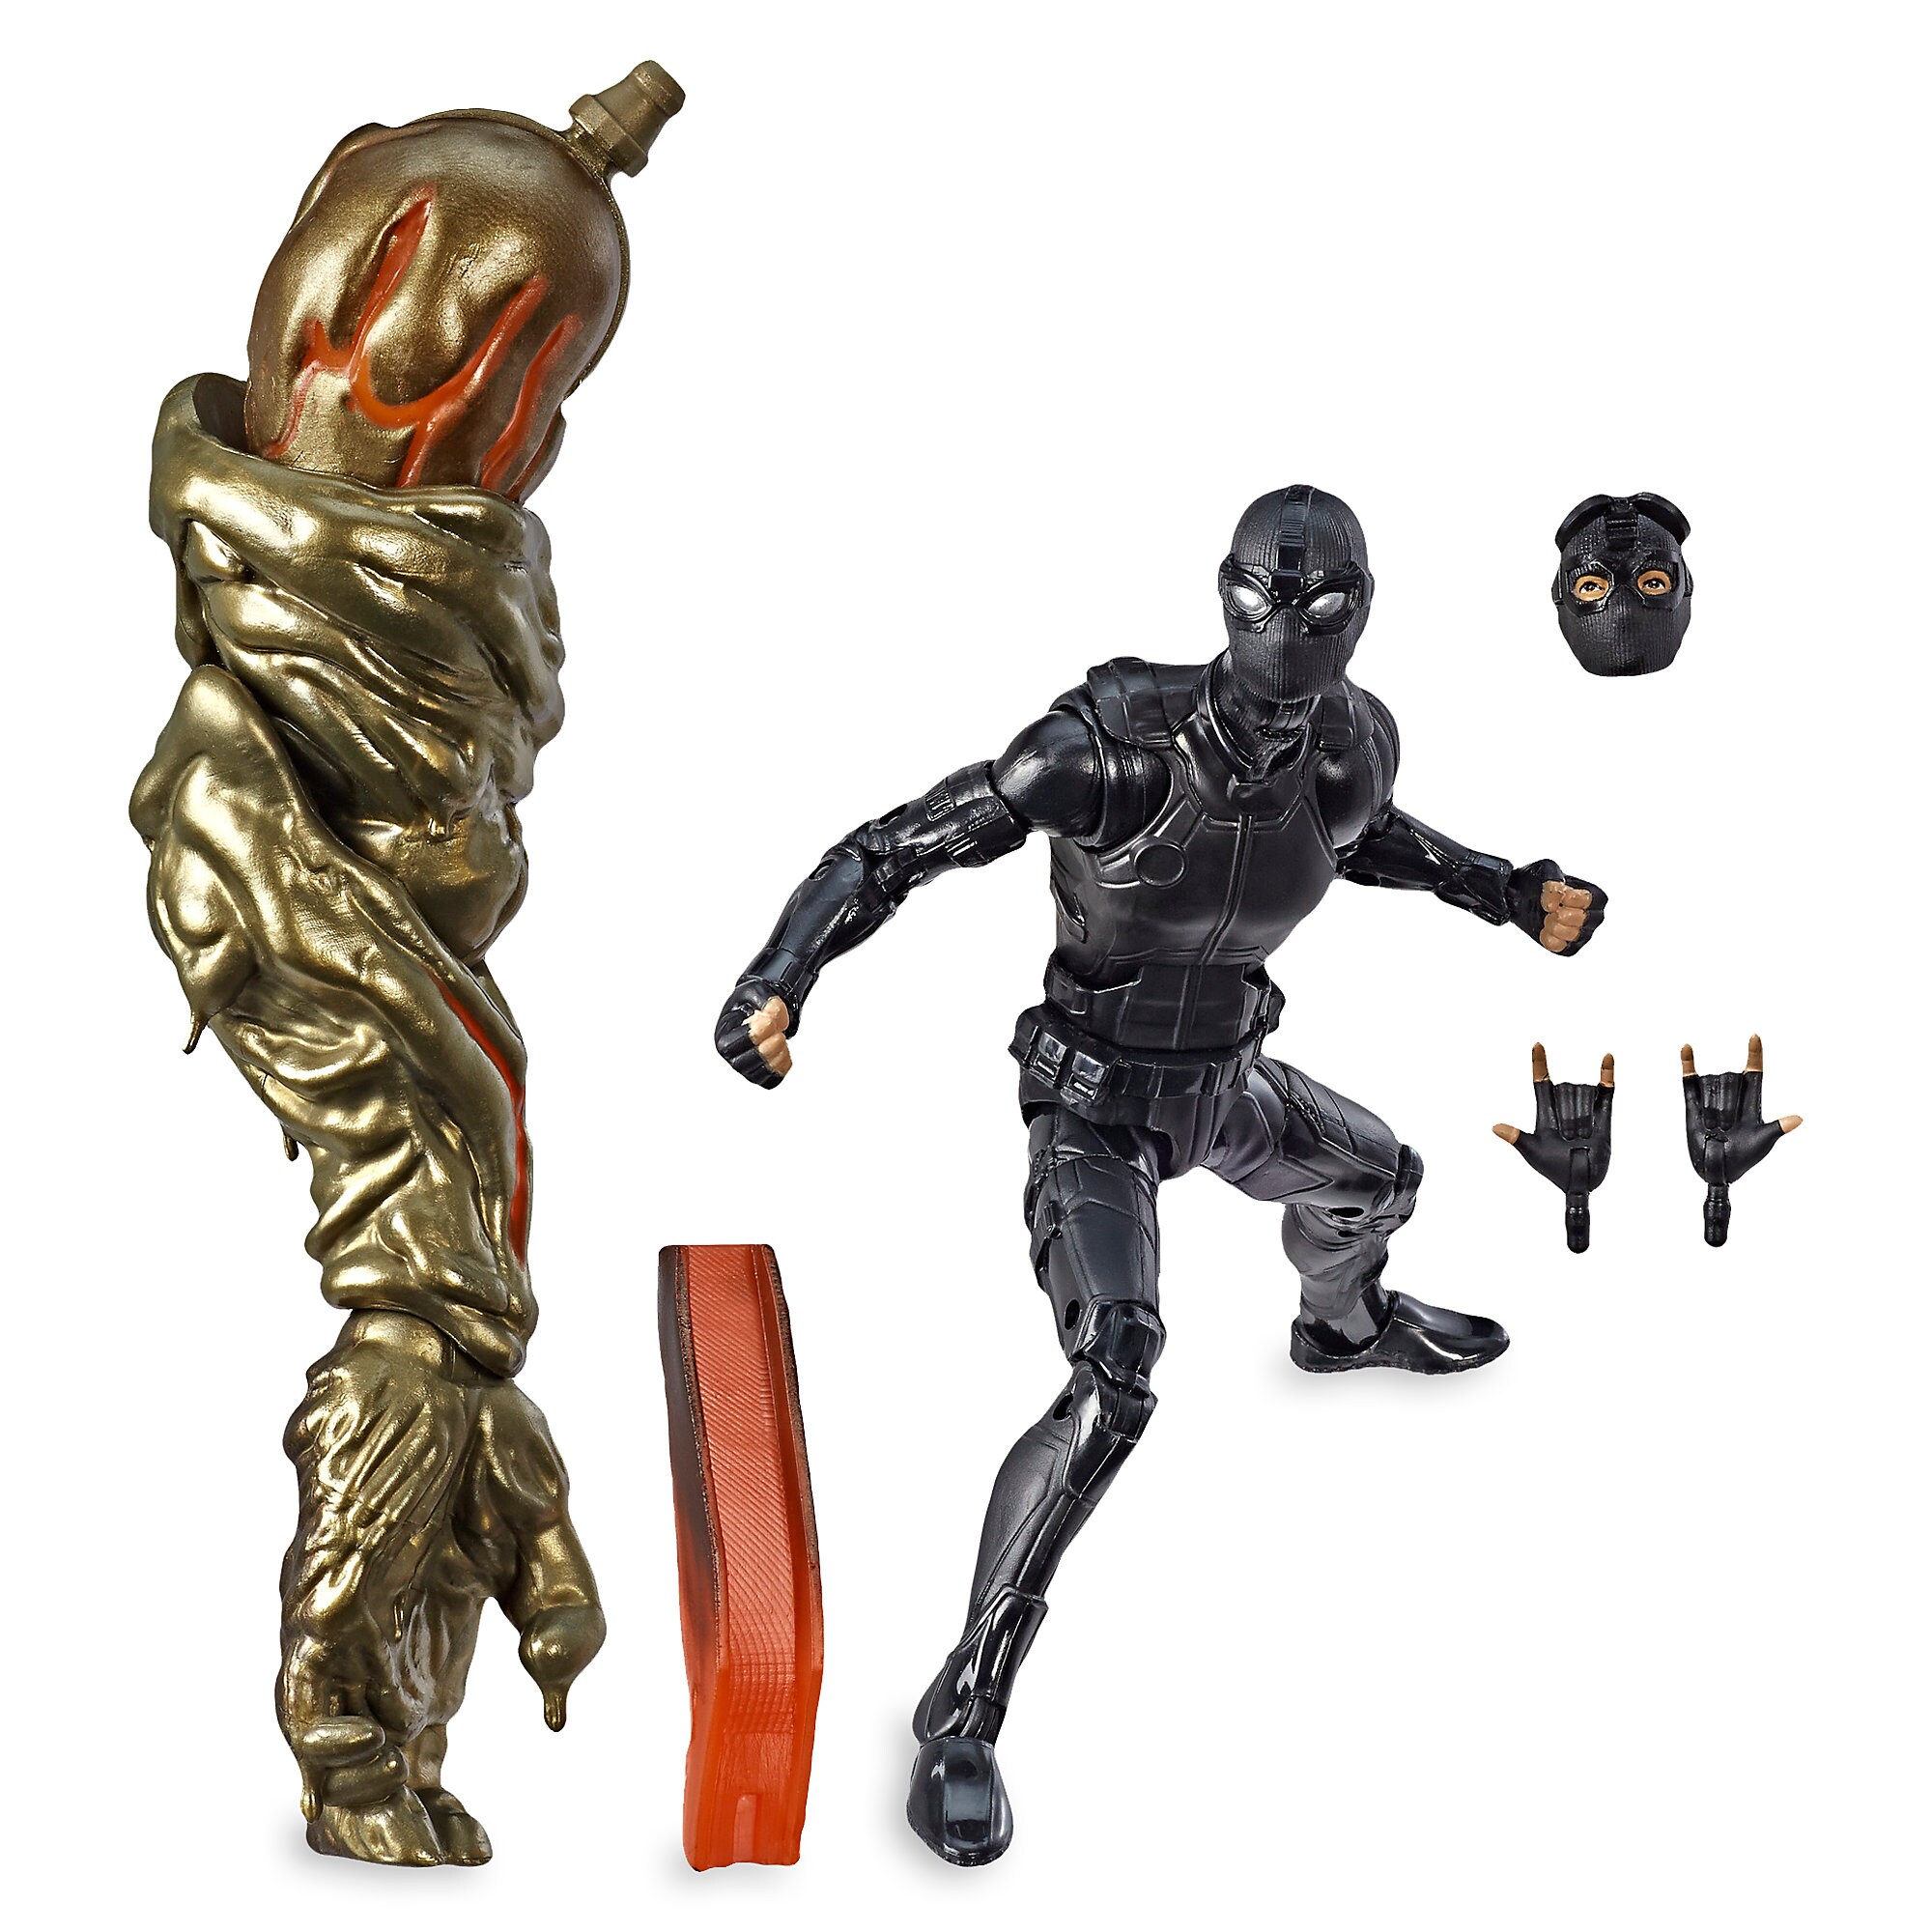 Spider-Man (Stealth Suit) Action Figure - Spider-Man: Far from Home Legends Series